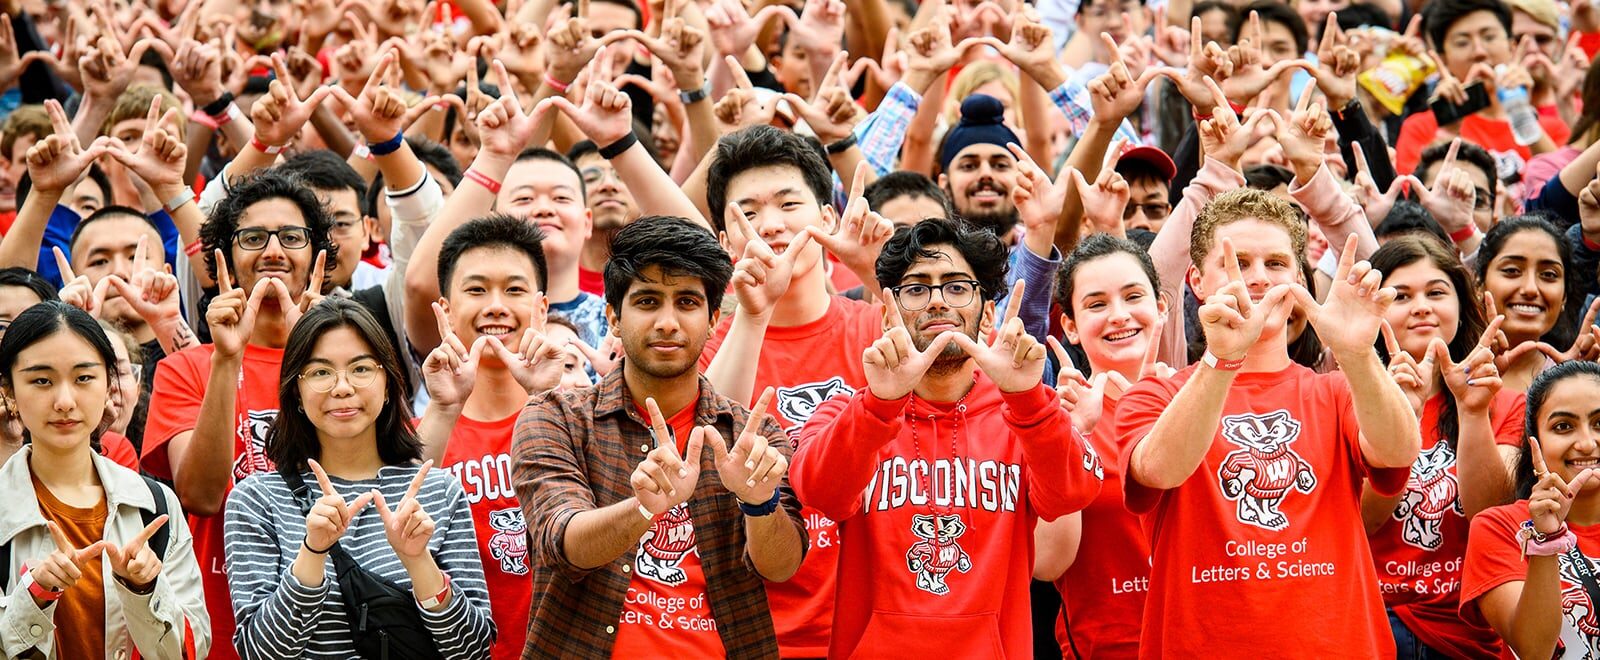 Hundreds of students, many wearing UW–Madison shirts, make the “W-sign” with their hands.